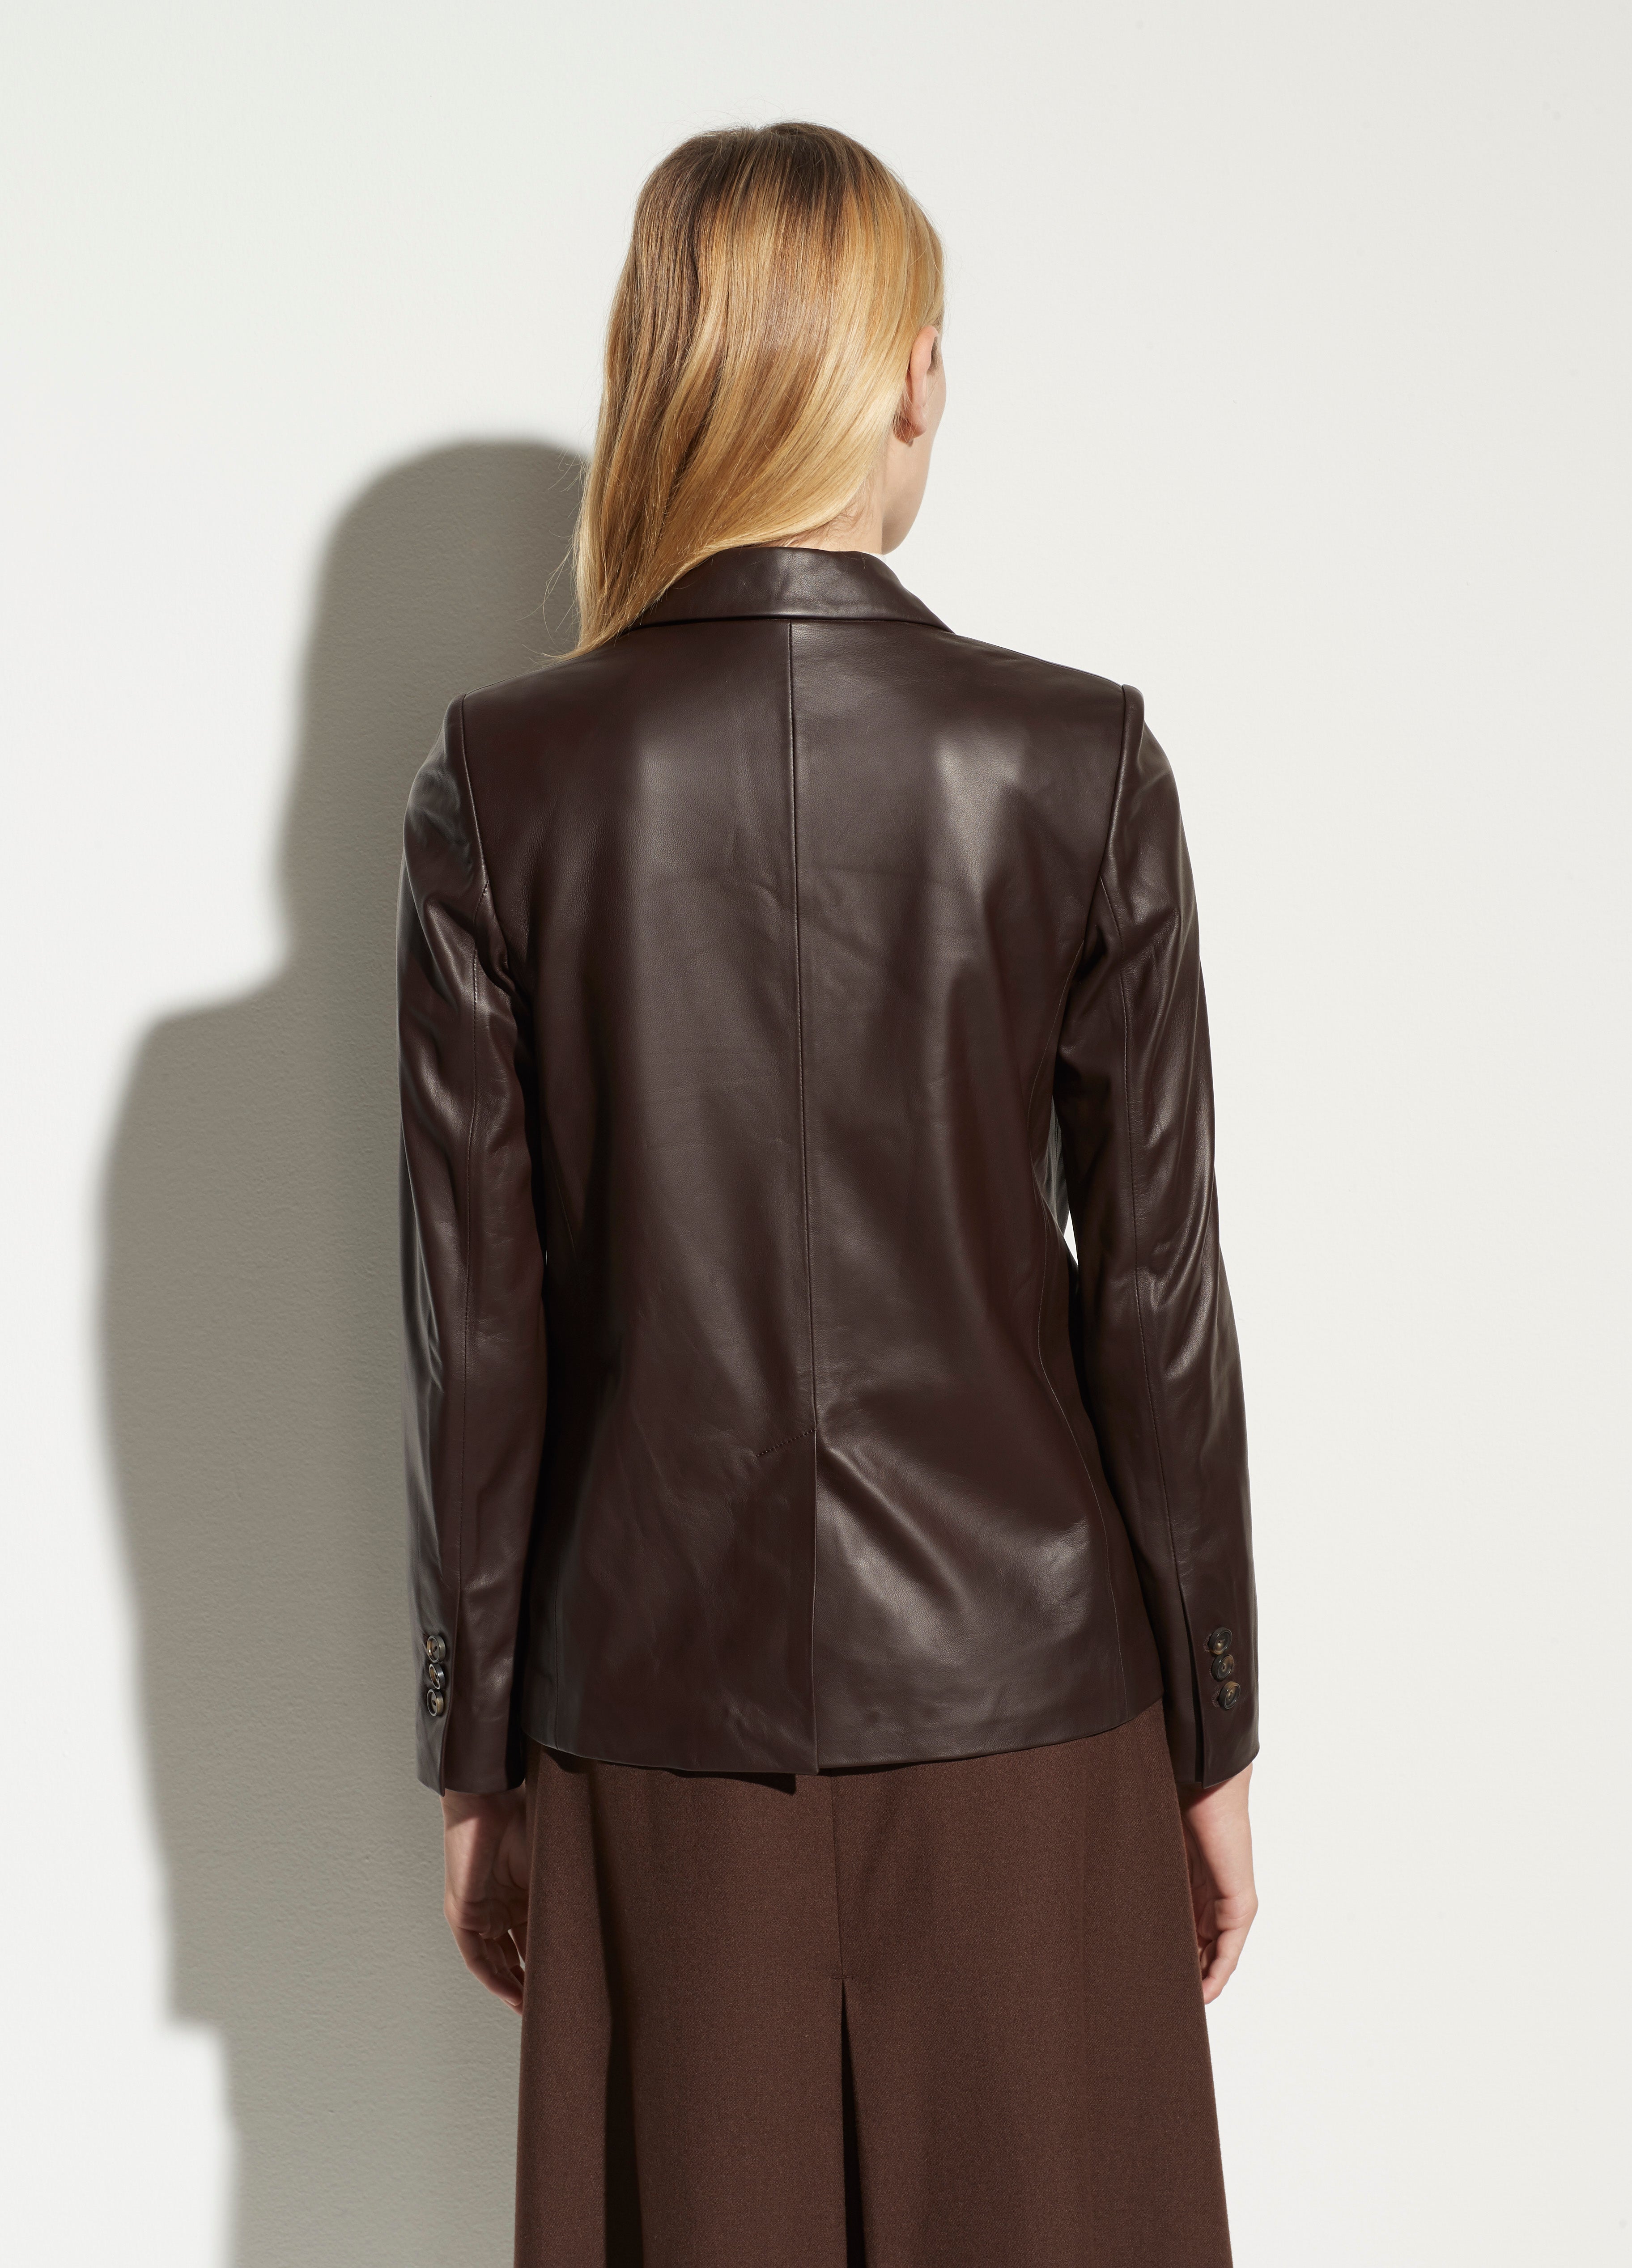 Vince | Fitted Leather Blazer in Chocolate | Vince Unfold